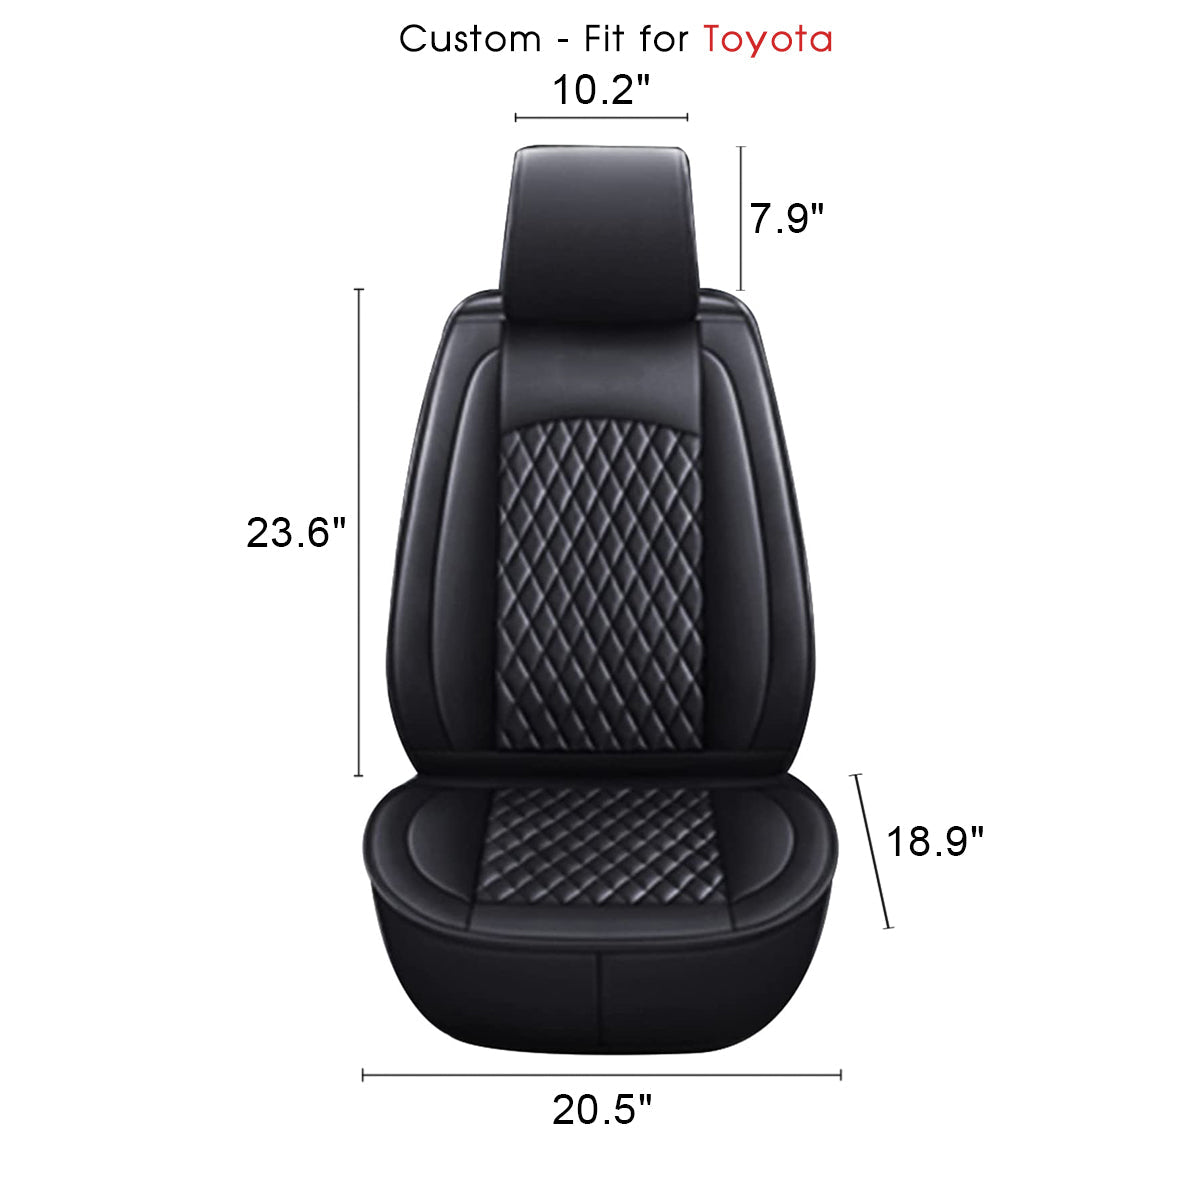 2 Car Seat Covers Full Set, Custom-Fit For Car, Waterproof Leather Front Rear Seat Automotive Protection Cushions, Car Accessories WAPF211